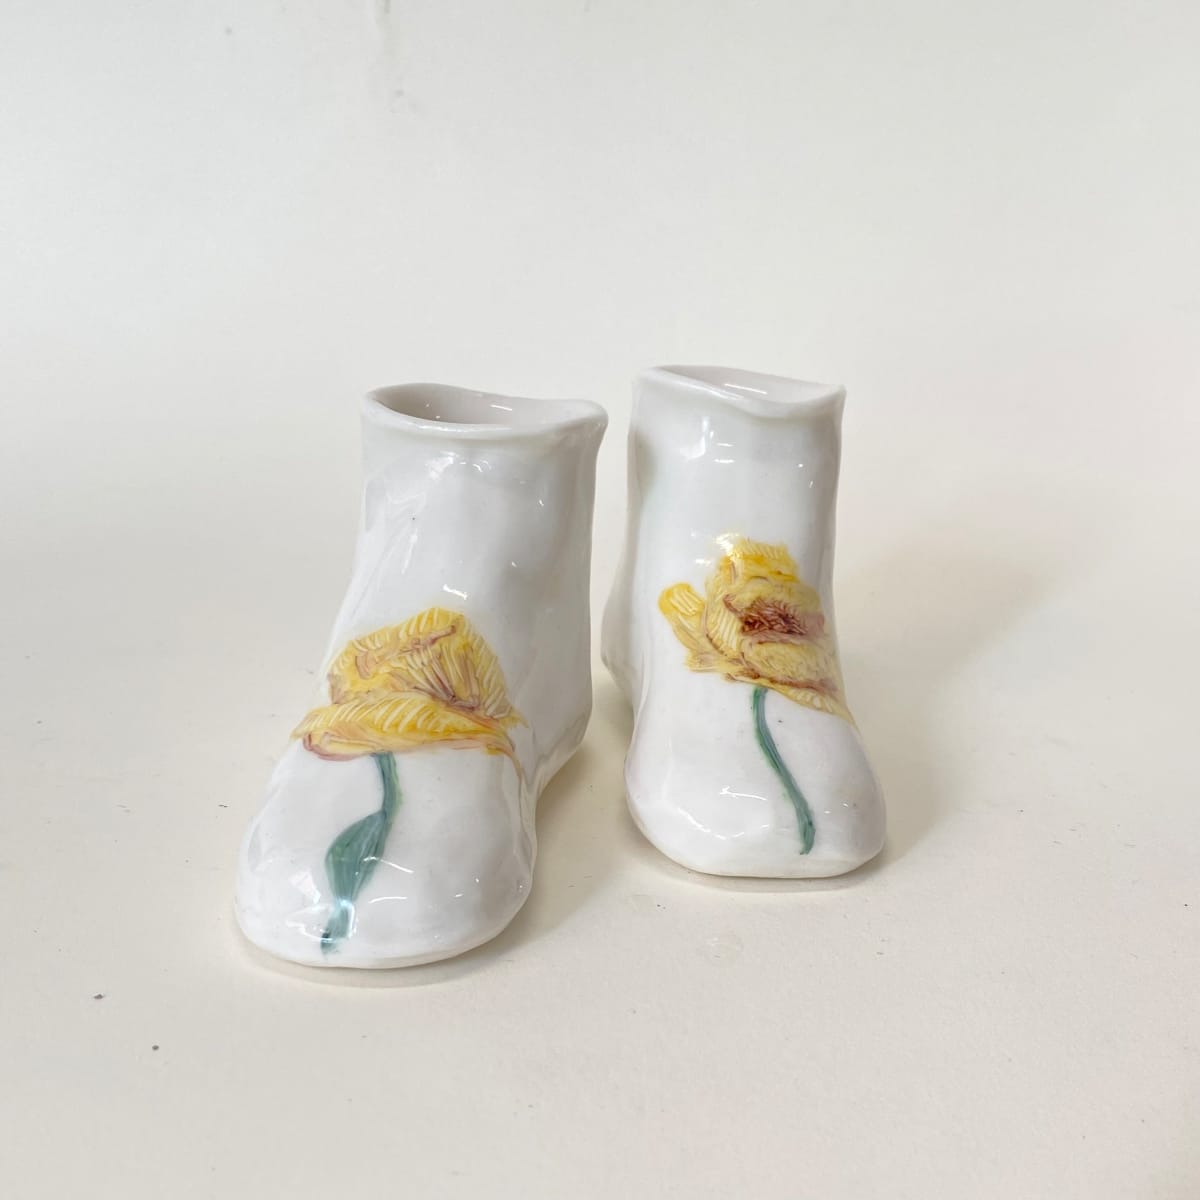 Yellow Poppies by annekwasner@gmail.com  Image: A pair of slip cast porcelain shoes, flowers hand painted with on-glaze.